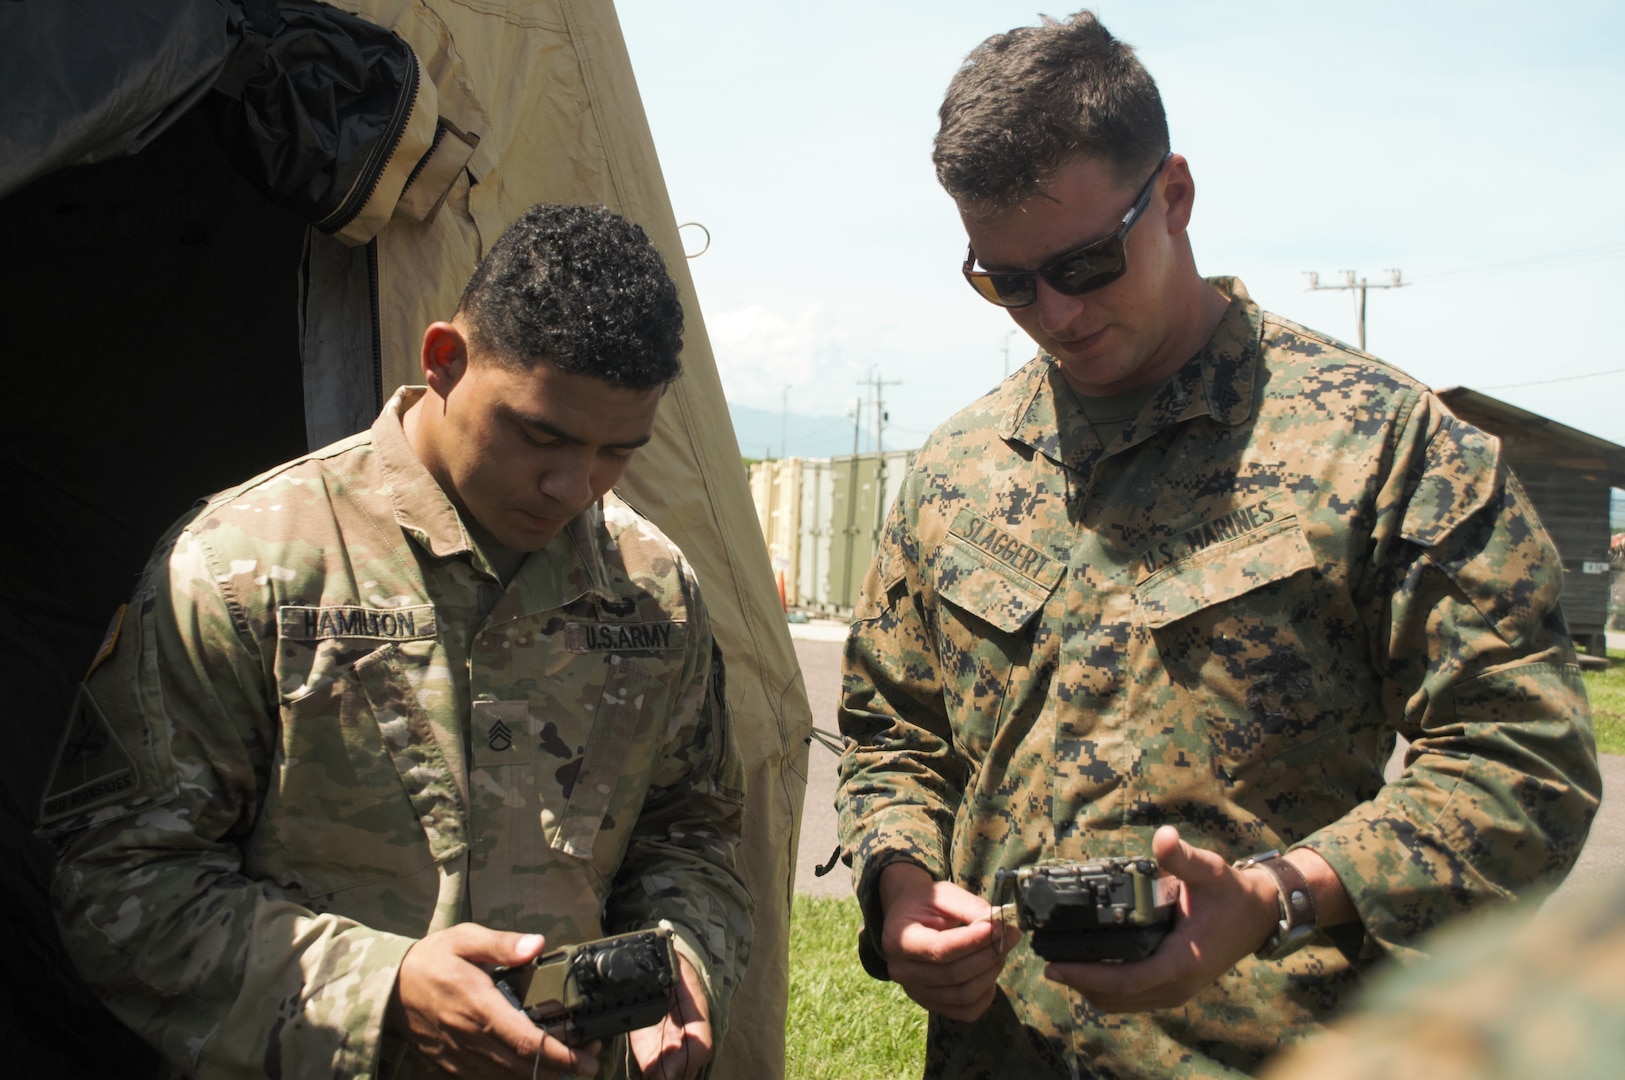 U.S. Army Staff Sgt.Tyrone Hamilton, left, the forward support noncommissioned officer in charge with Joint Task Force - Bravo's 1st Battalion, 228th Aviation Regiment, and U.S. Marine Cpl. Tyler Slaggert, a field radio operator with Special Purpose Marine Air-Ground Task Force - Southern Command, link their communications equipment together to secure reliable voice communication during a communications exercise aboard Soto Cano Air Base, Honduras, to prepare for future joint-level operations, June 19, 2018. The Marines and sailors of SPMAGTF-SC are conducting security cooperation training and engineering projects alongside partner nation military forces in Central and South America. The unit is also on standby to provide humanitarian assistance and disaster relief in the event of a hurricane or other emergency in the region.